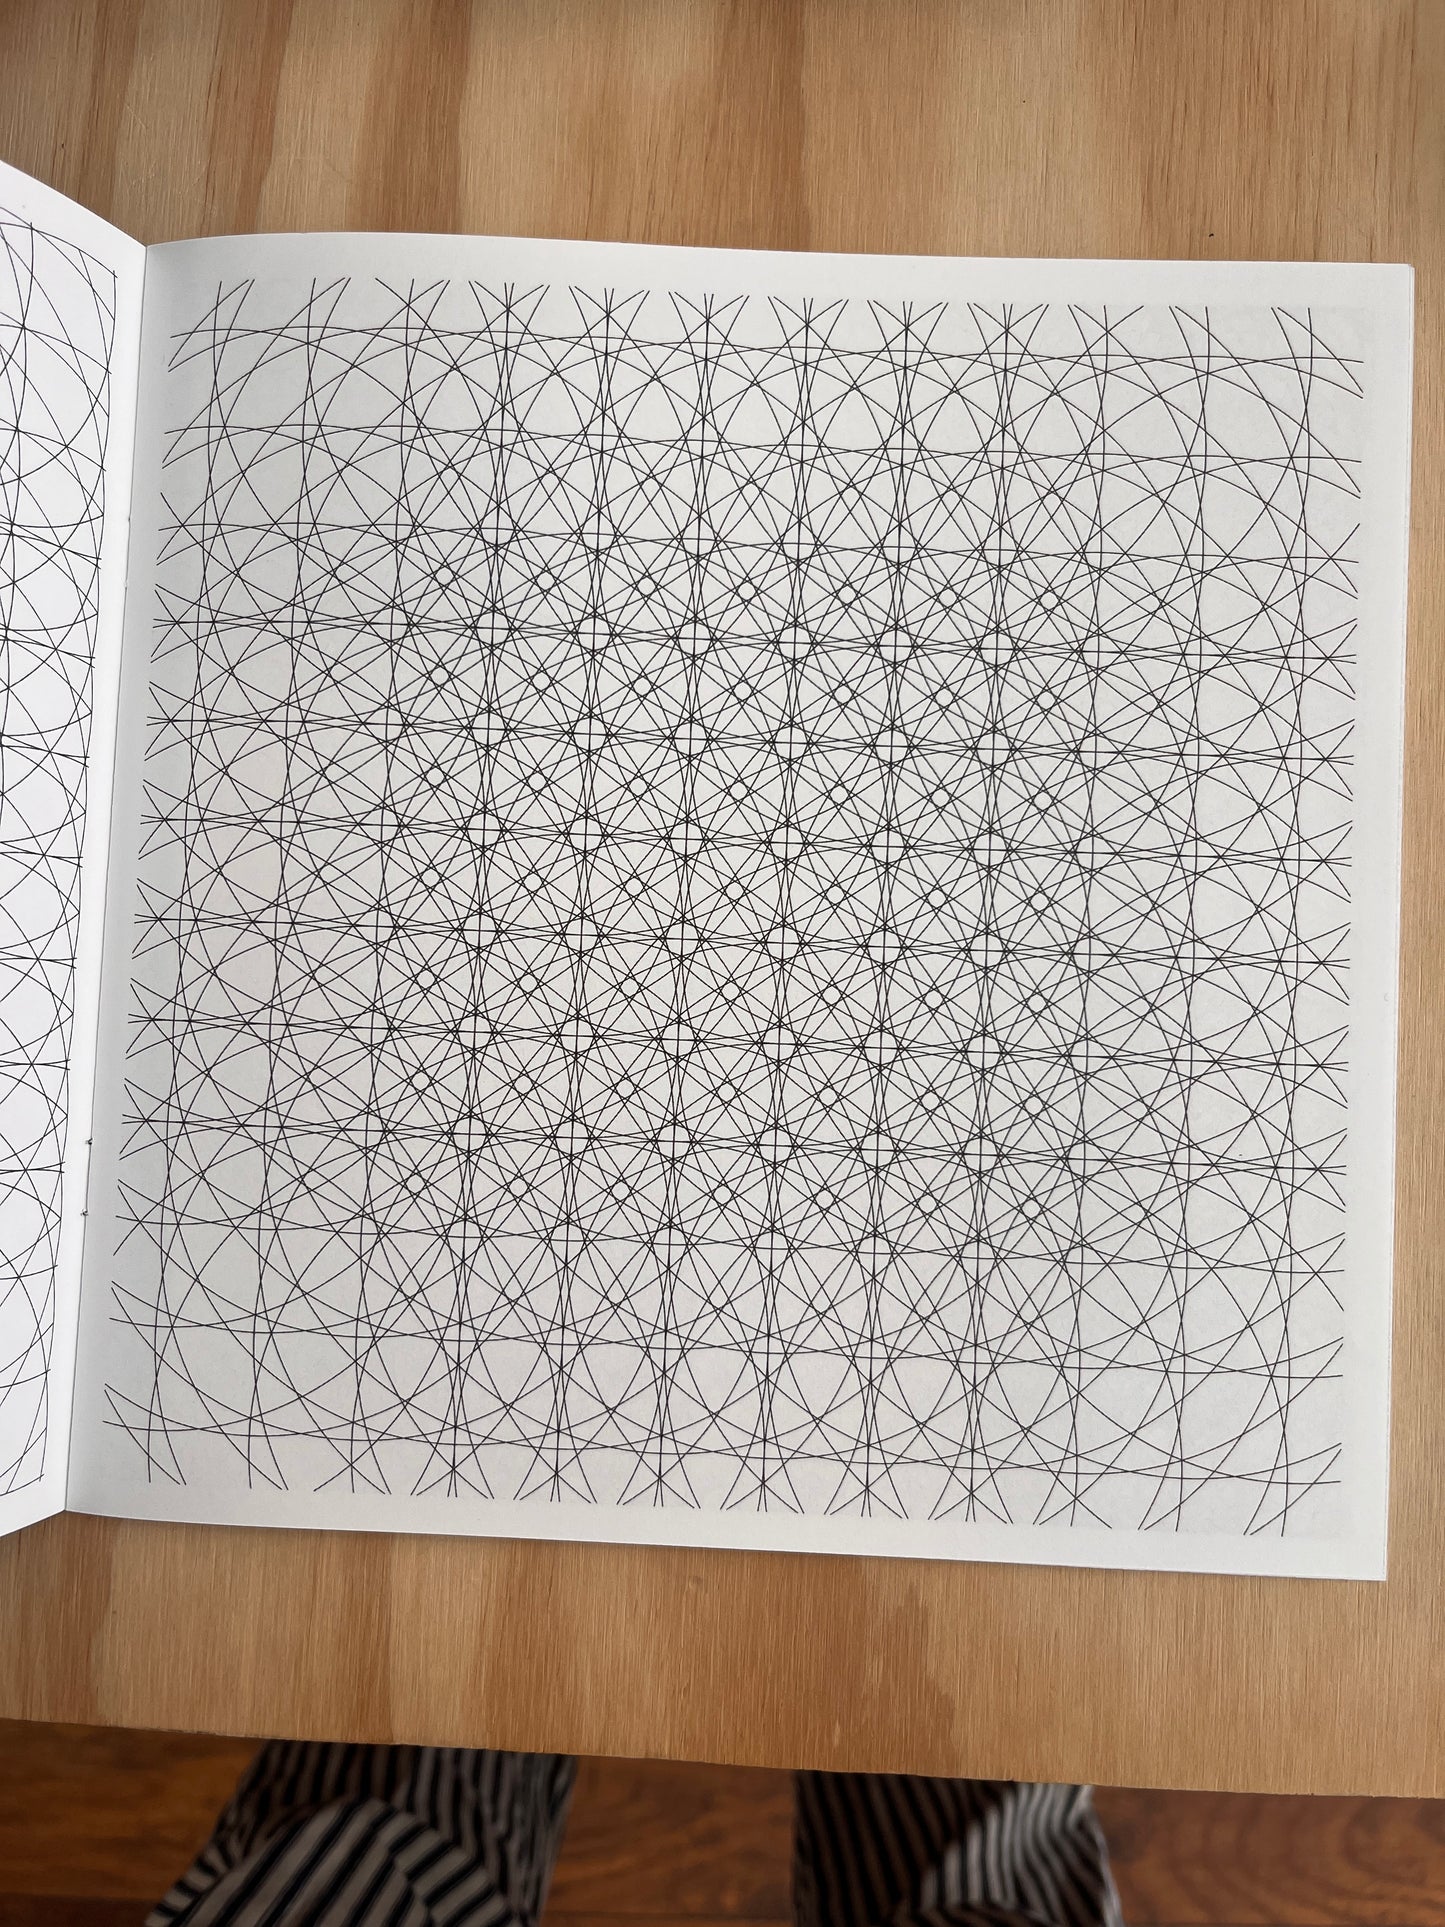 144 Circles Expand into Nothingness